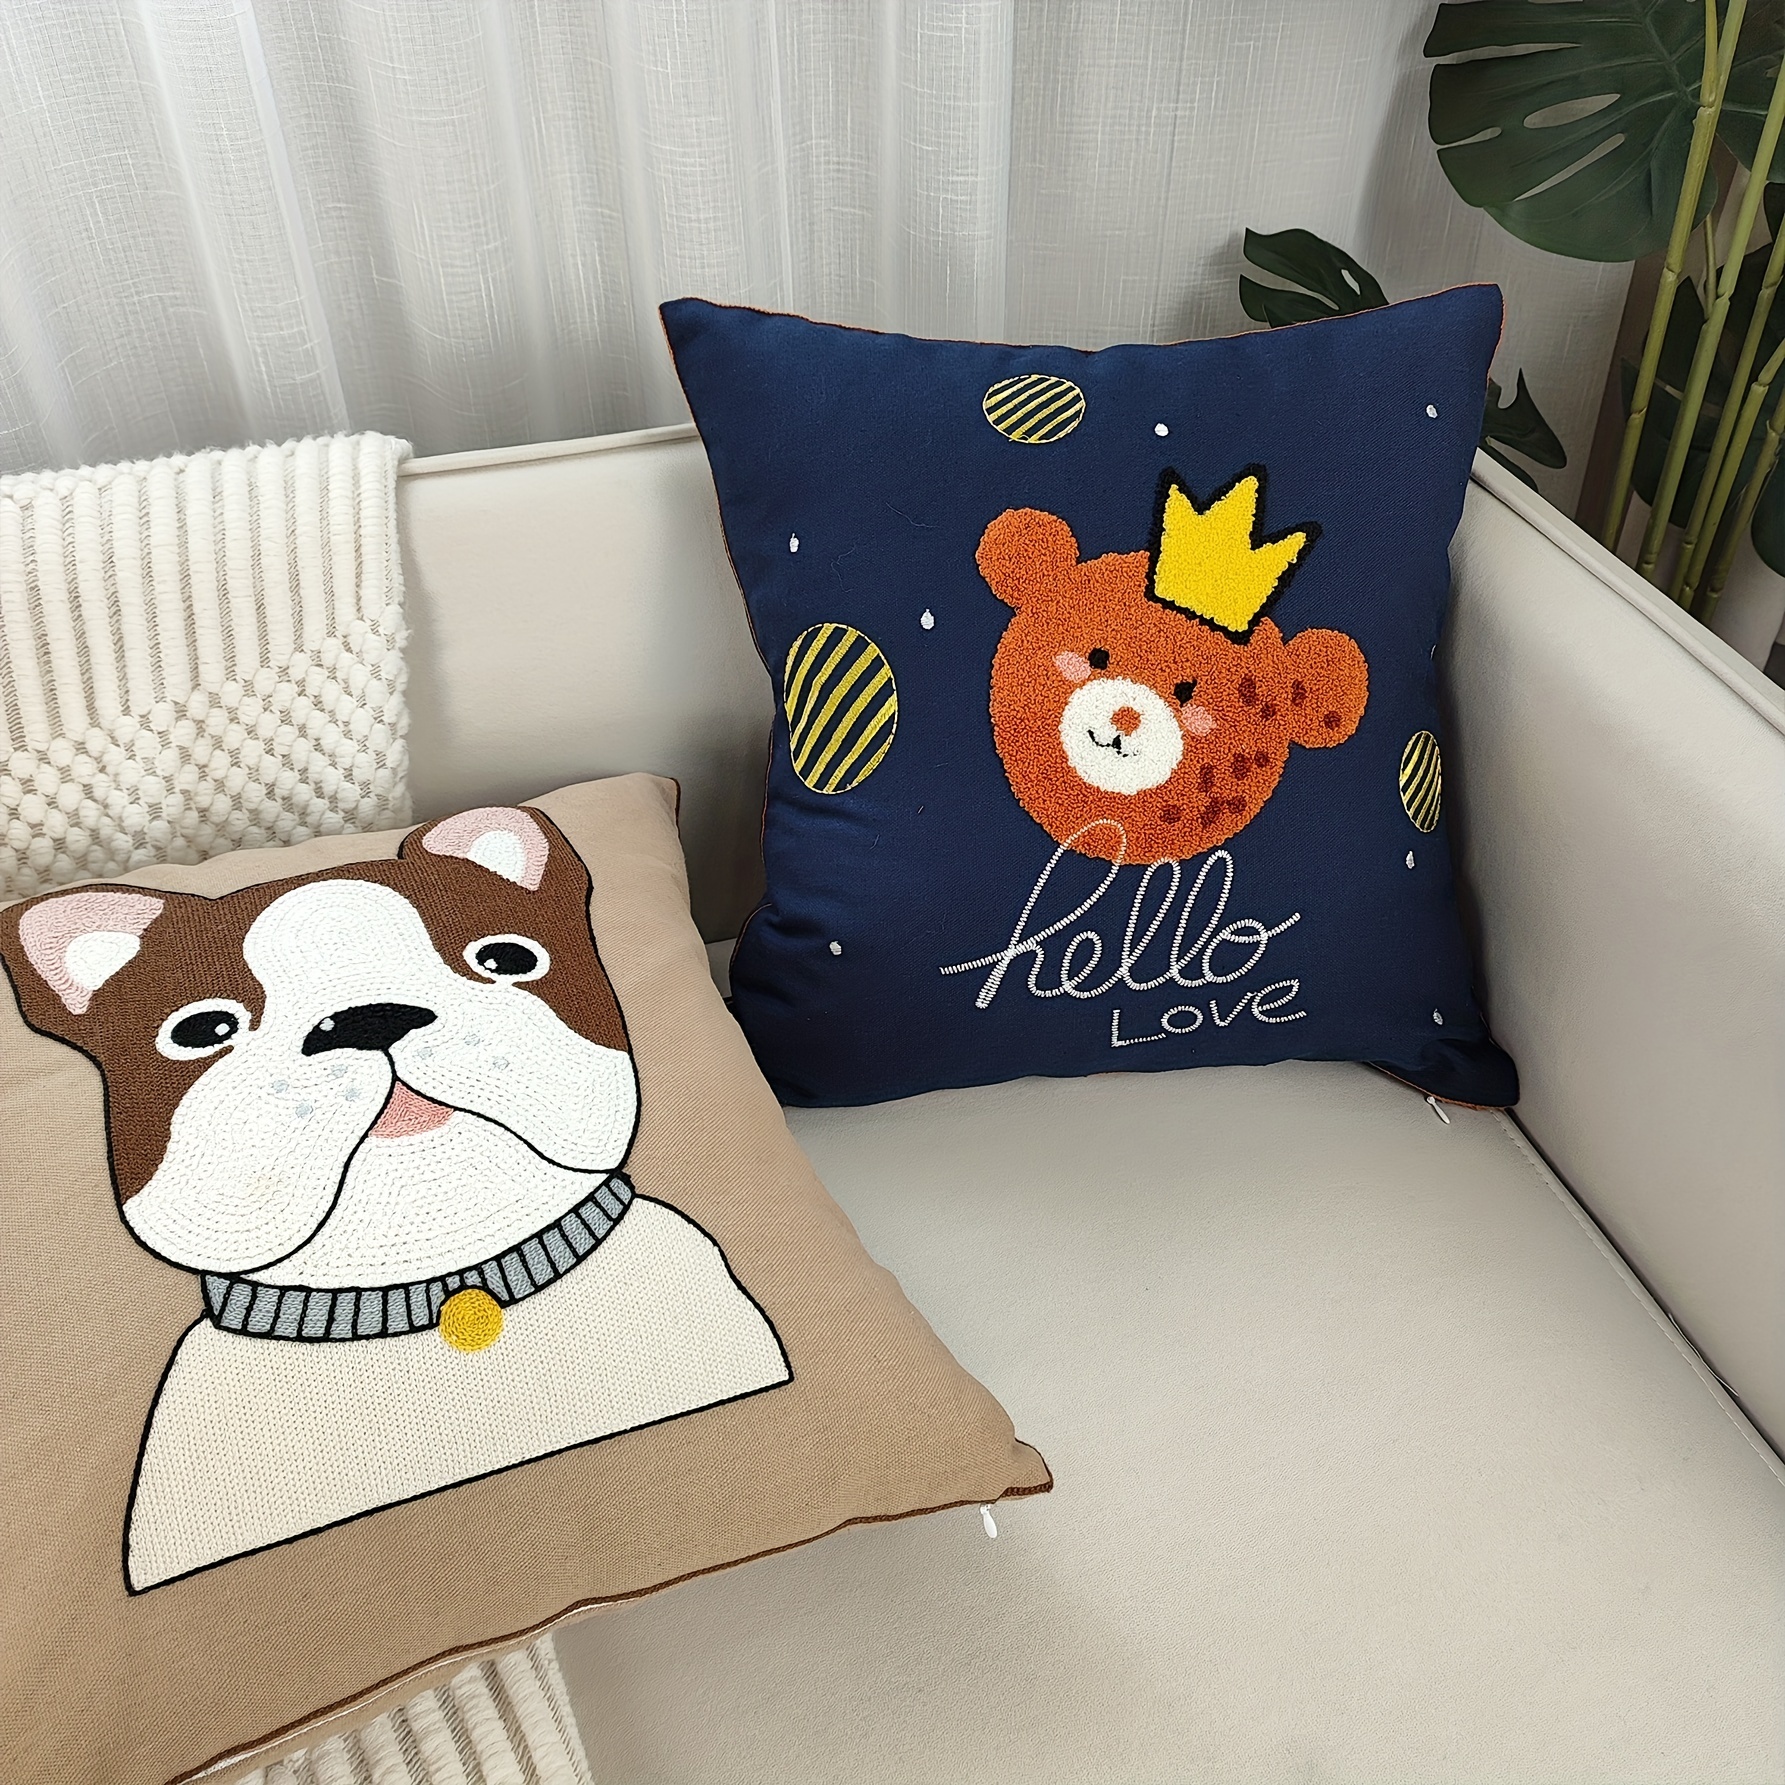 1pc Cartoon Animal & Text Phrase Printed Decorative Pillow Cover For  Bedroom, Living Room